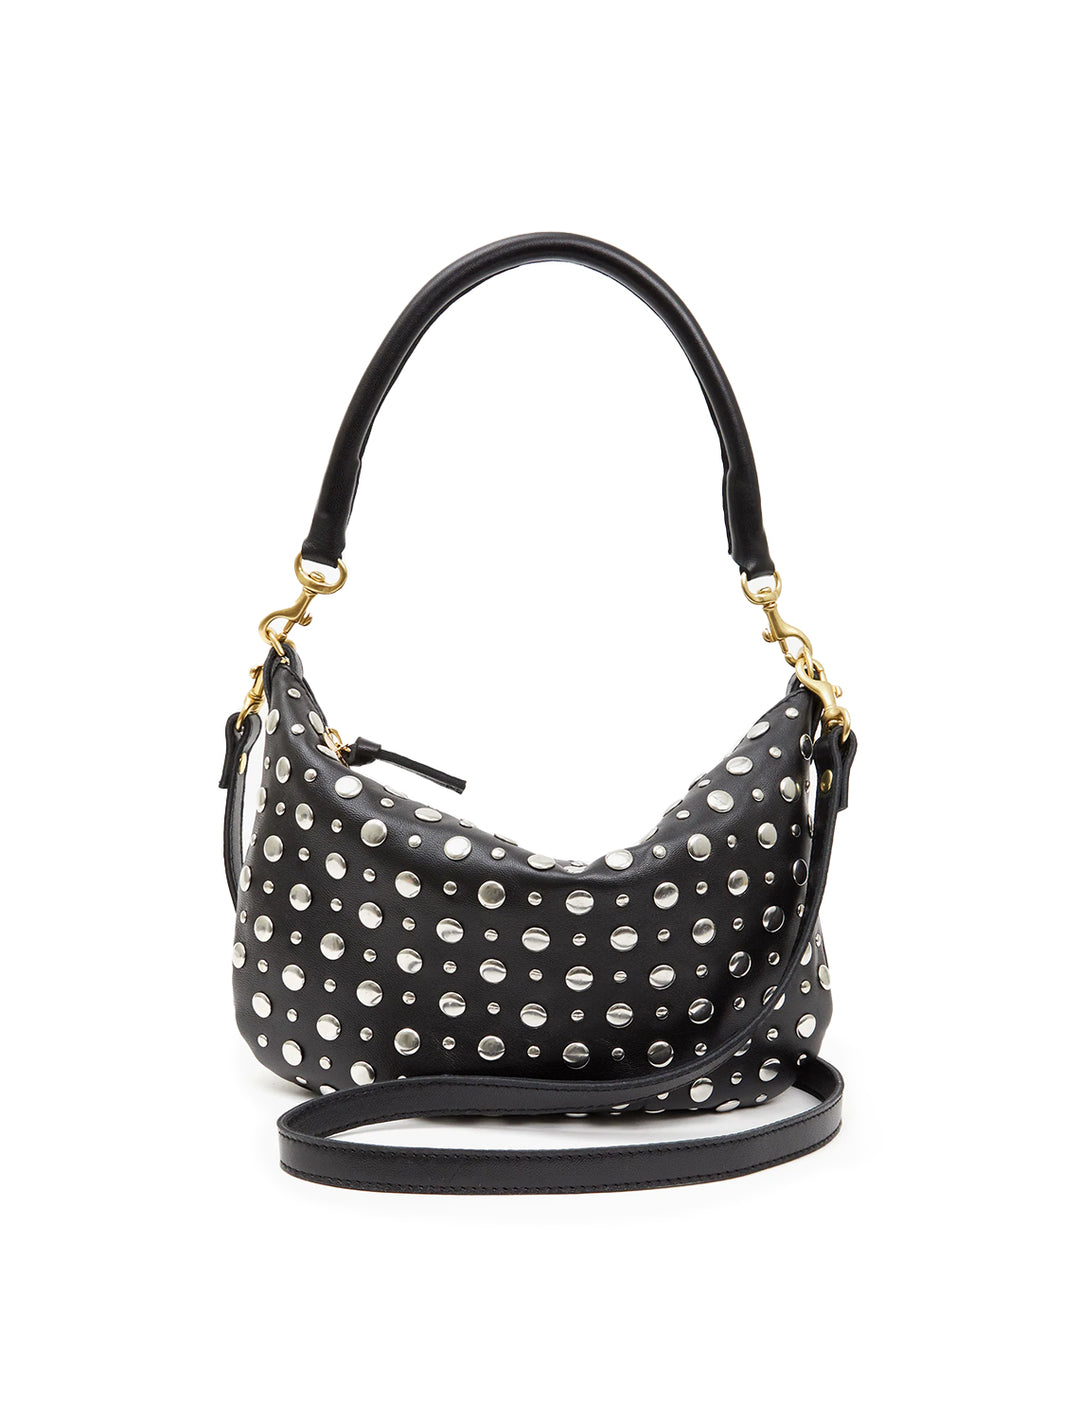 Clare V. - Petit Moyen Messenger in Black with Silver Studs